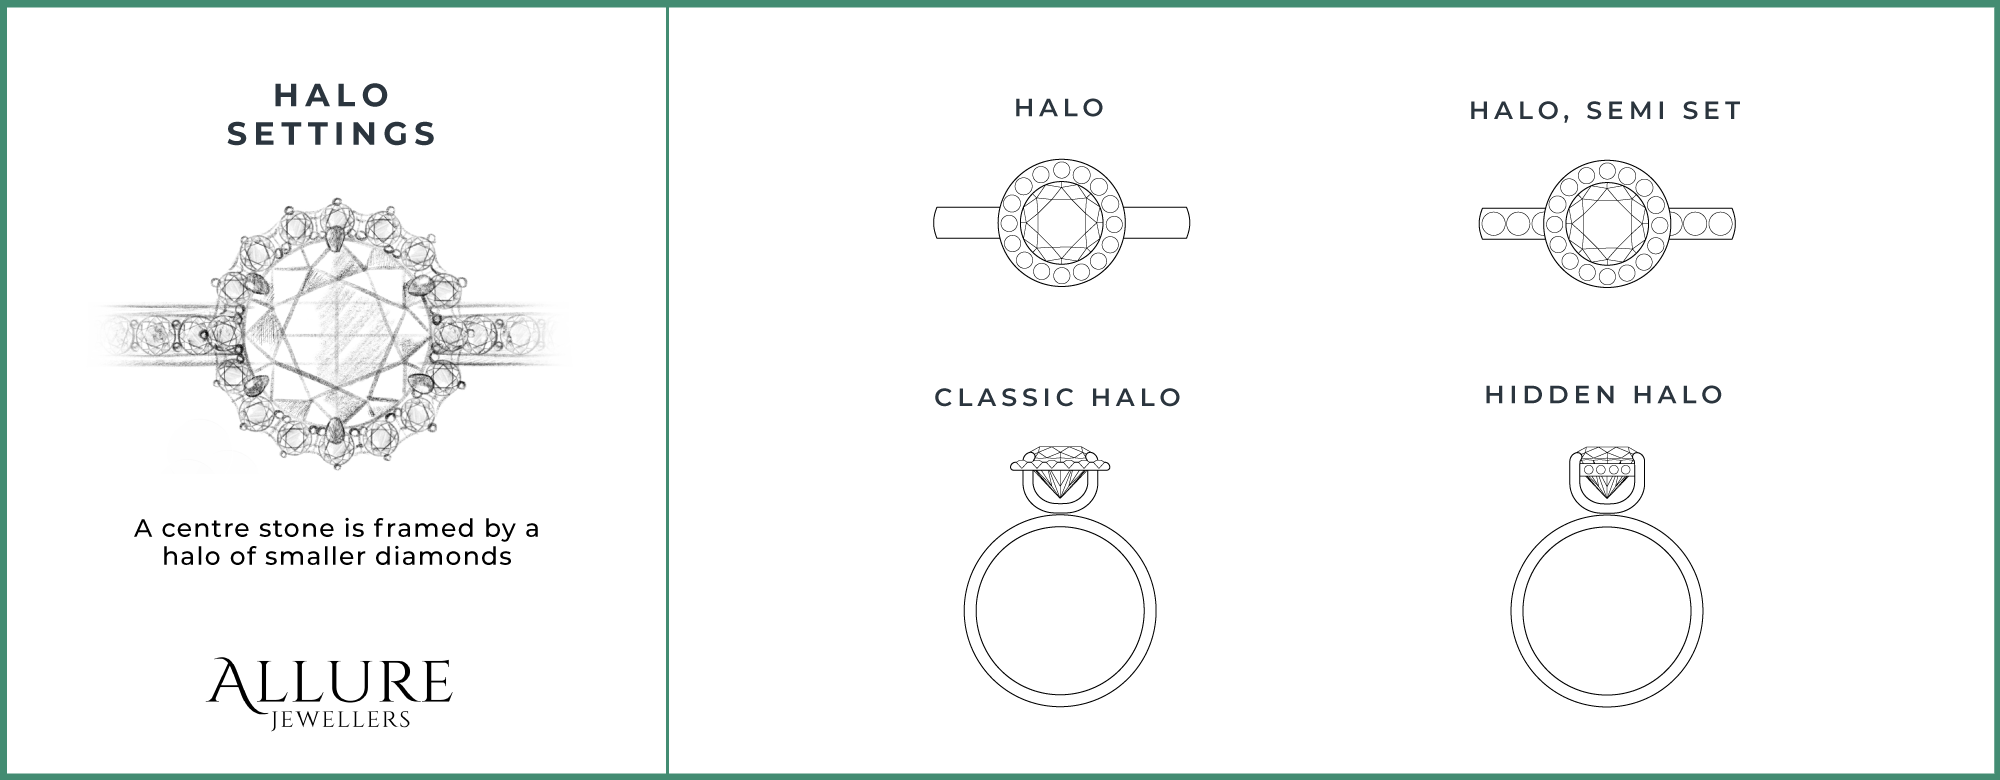 Halo ring settings at Allure Jewellers 